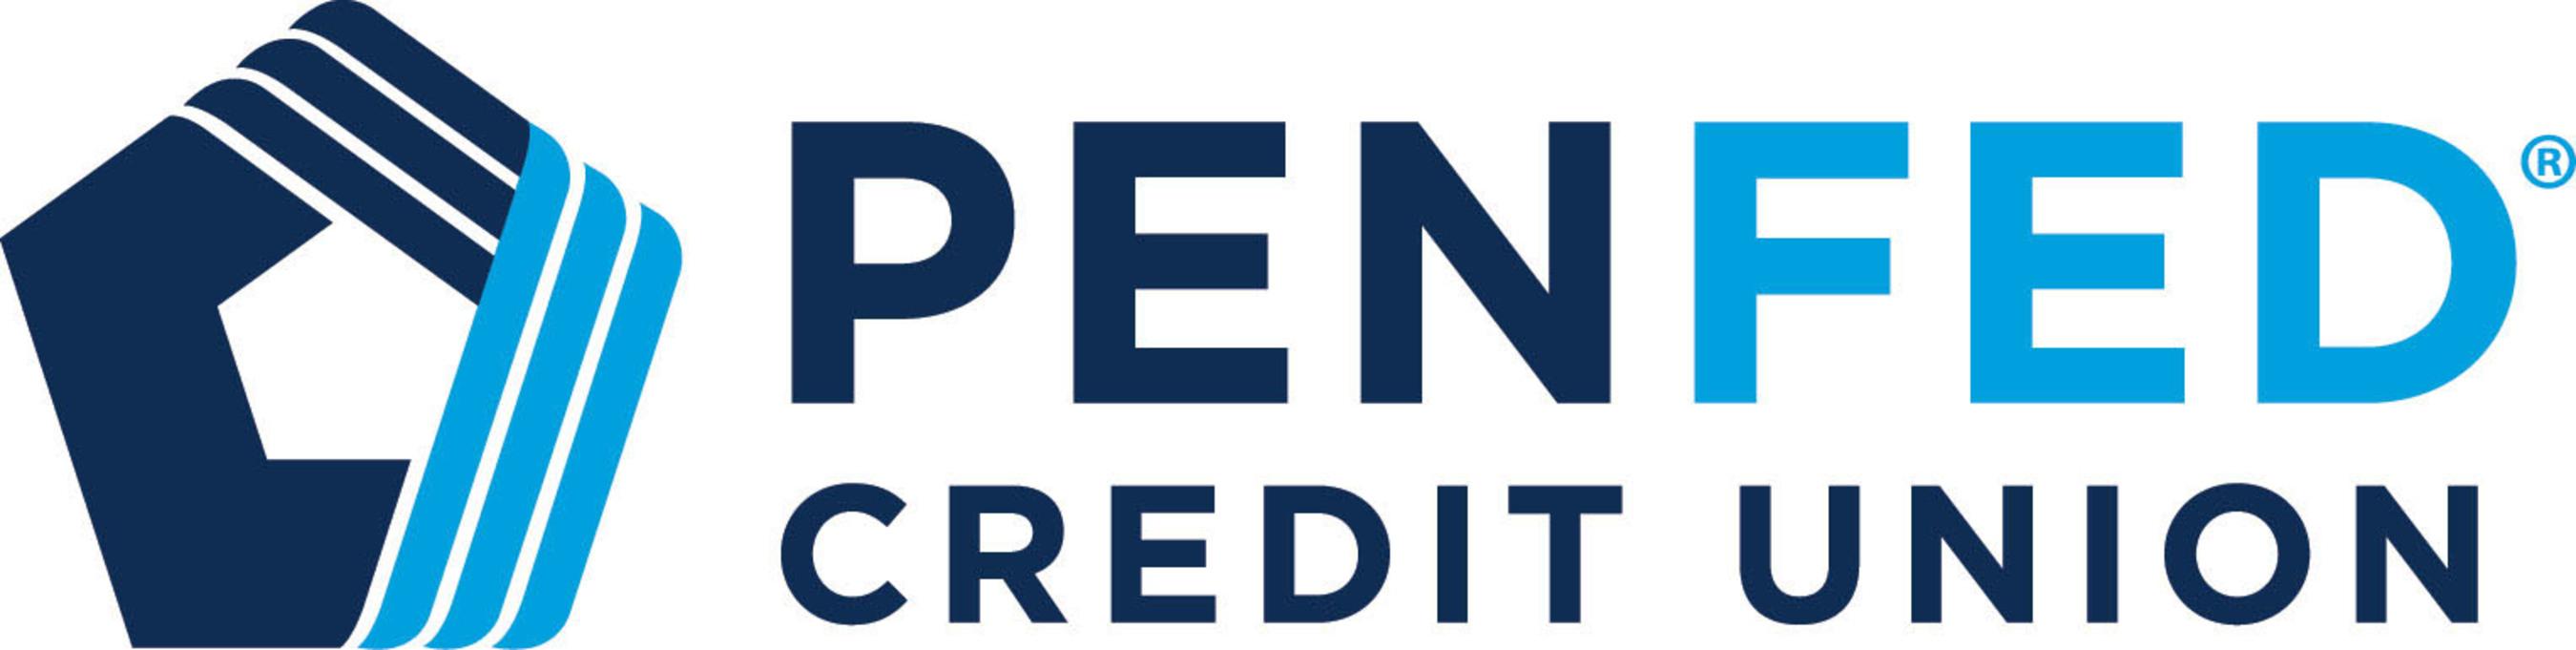 PenFed Credit Union Personal Loans Logo